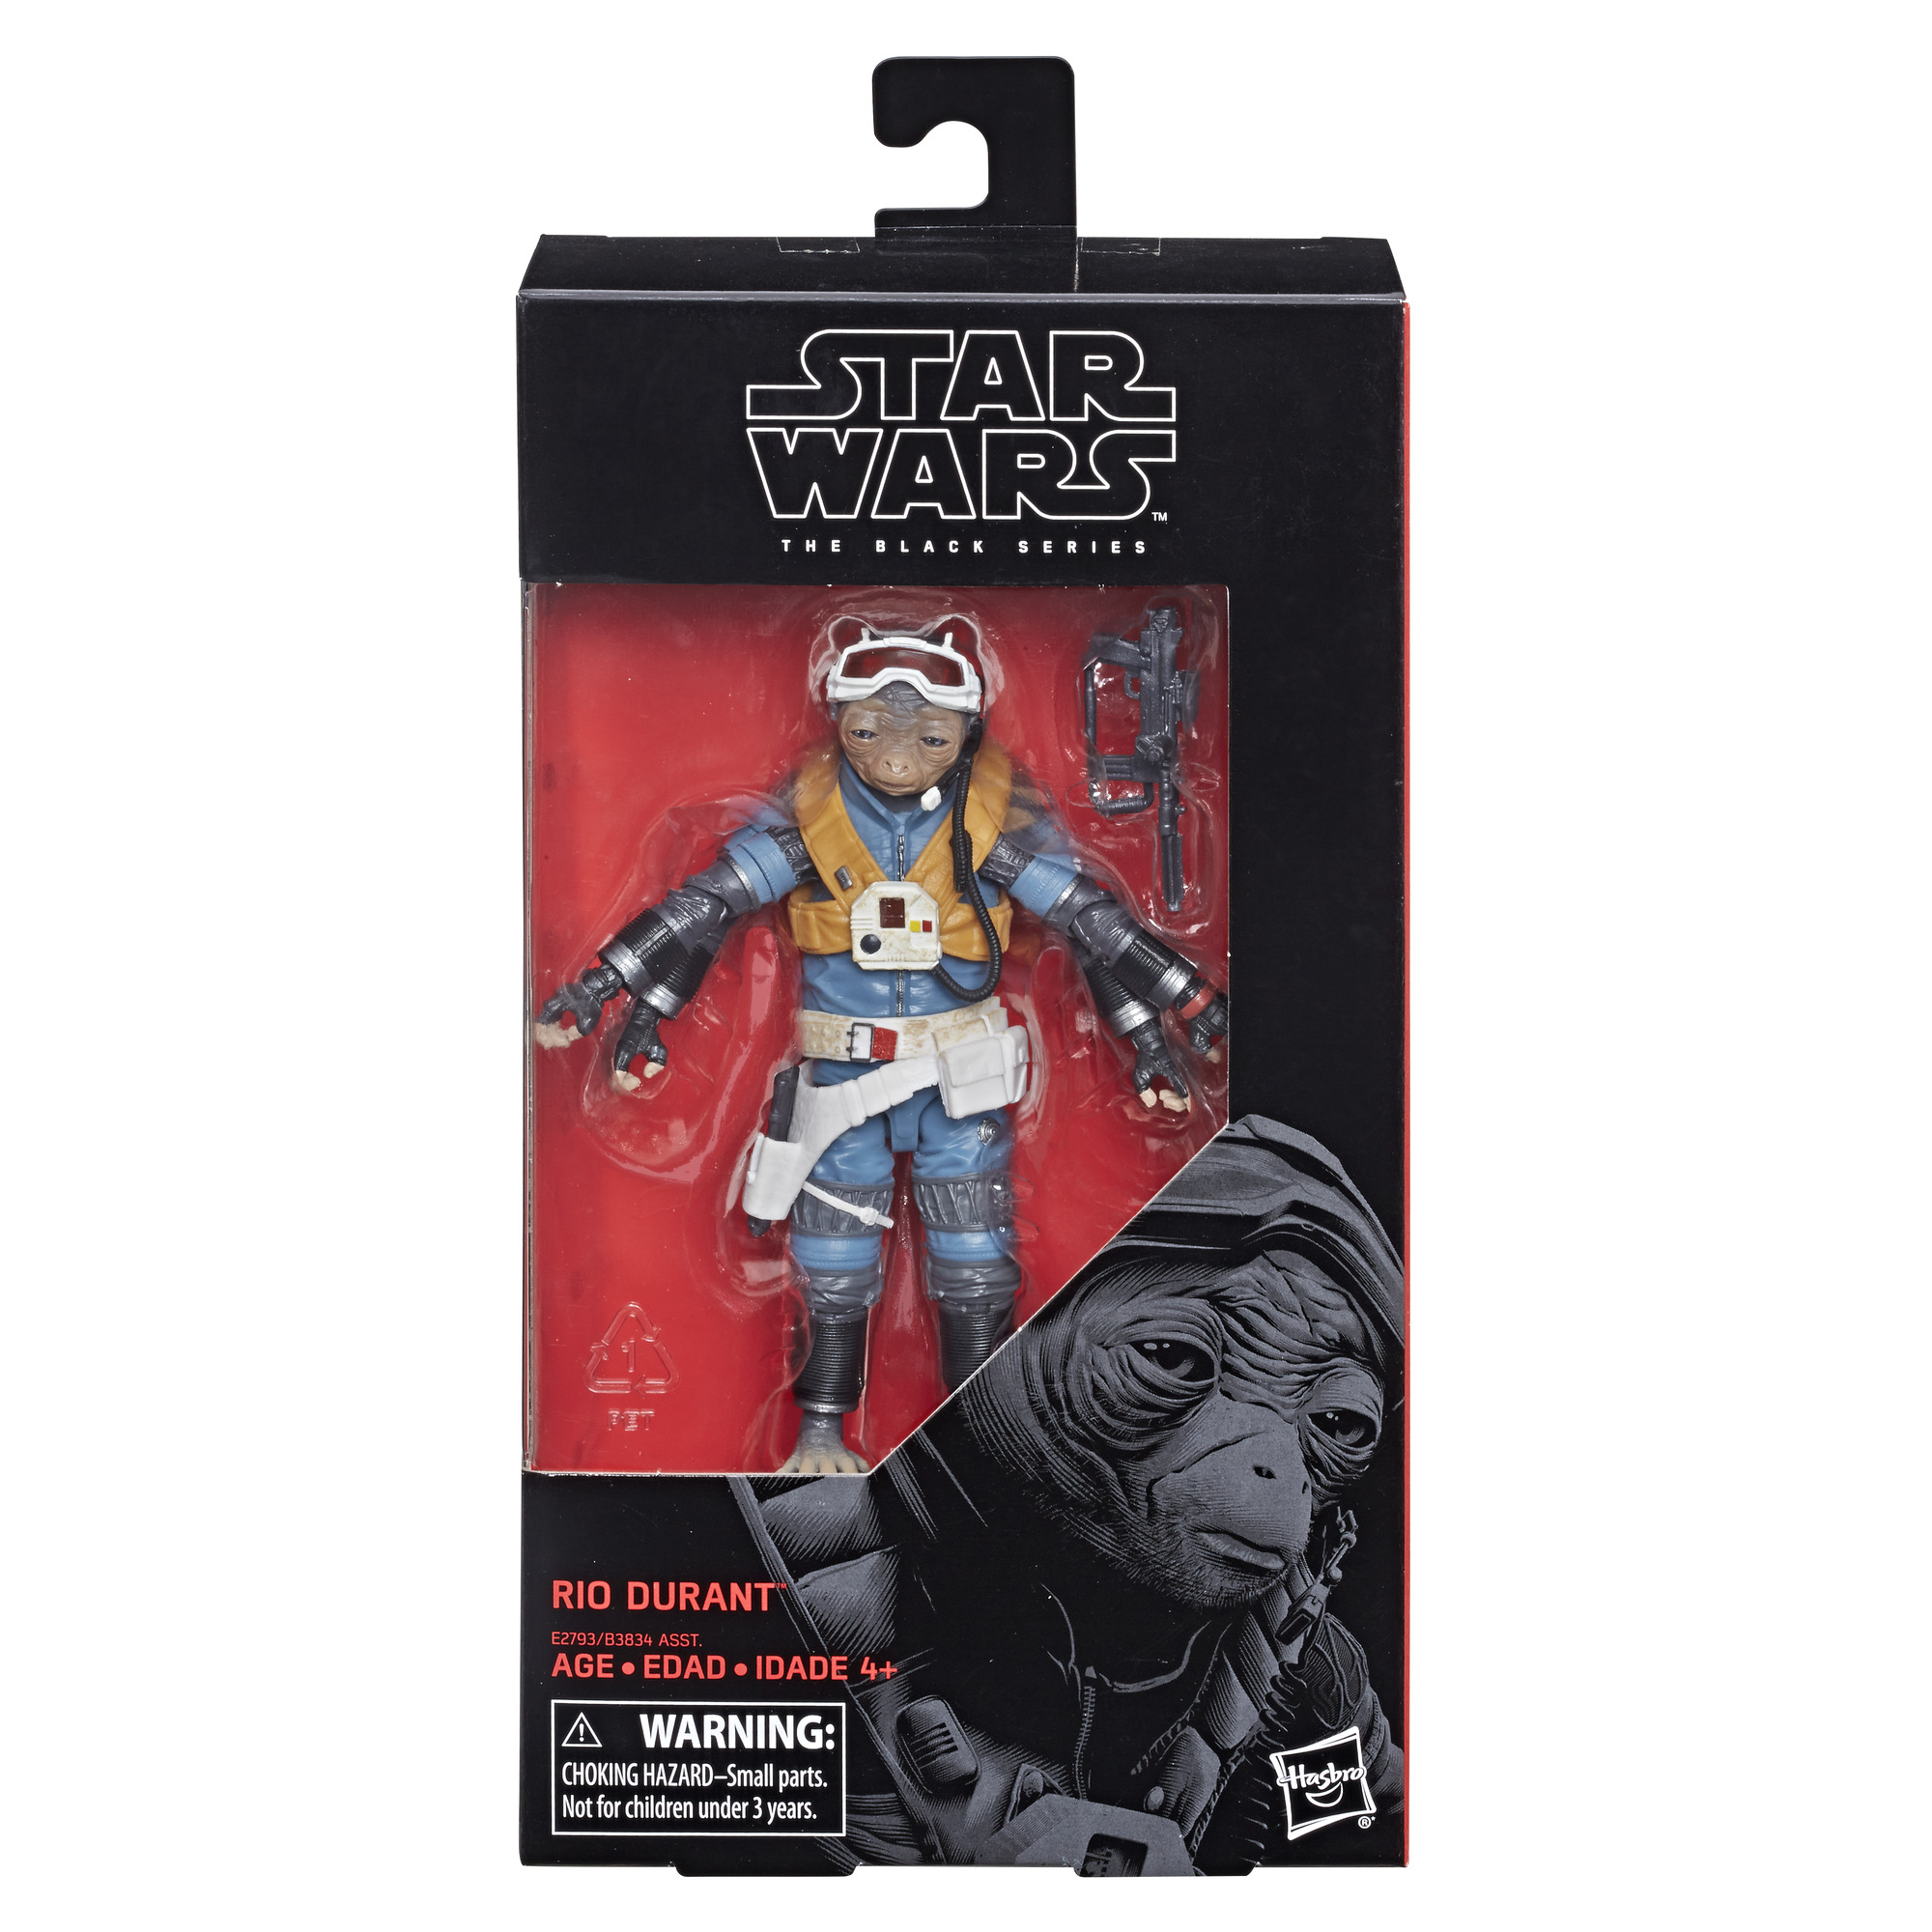 Star Wars The Black Series 6-inch Rio Durant figure - image 2 of 2